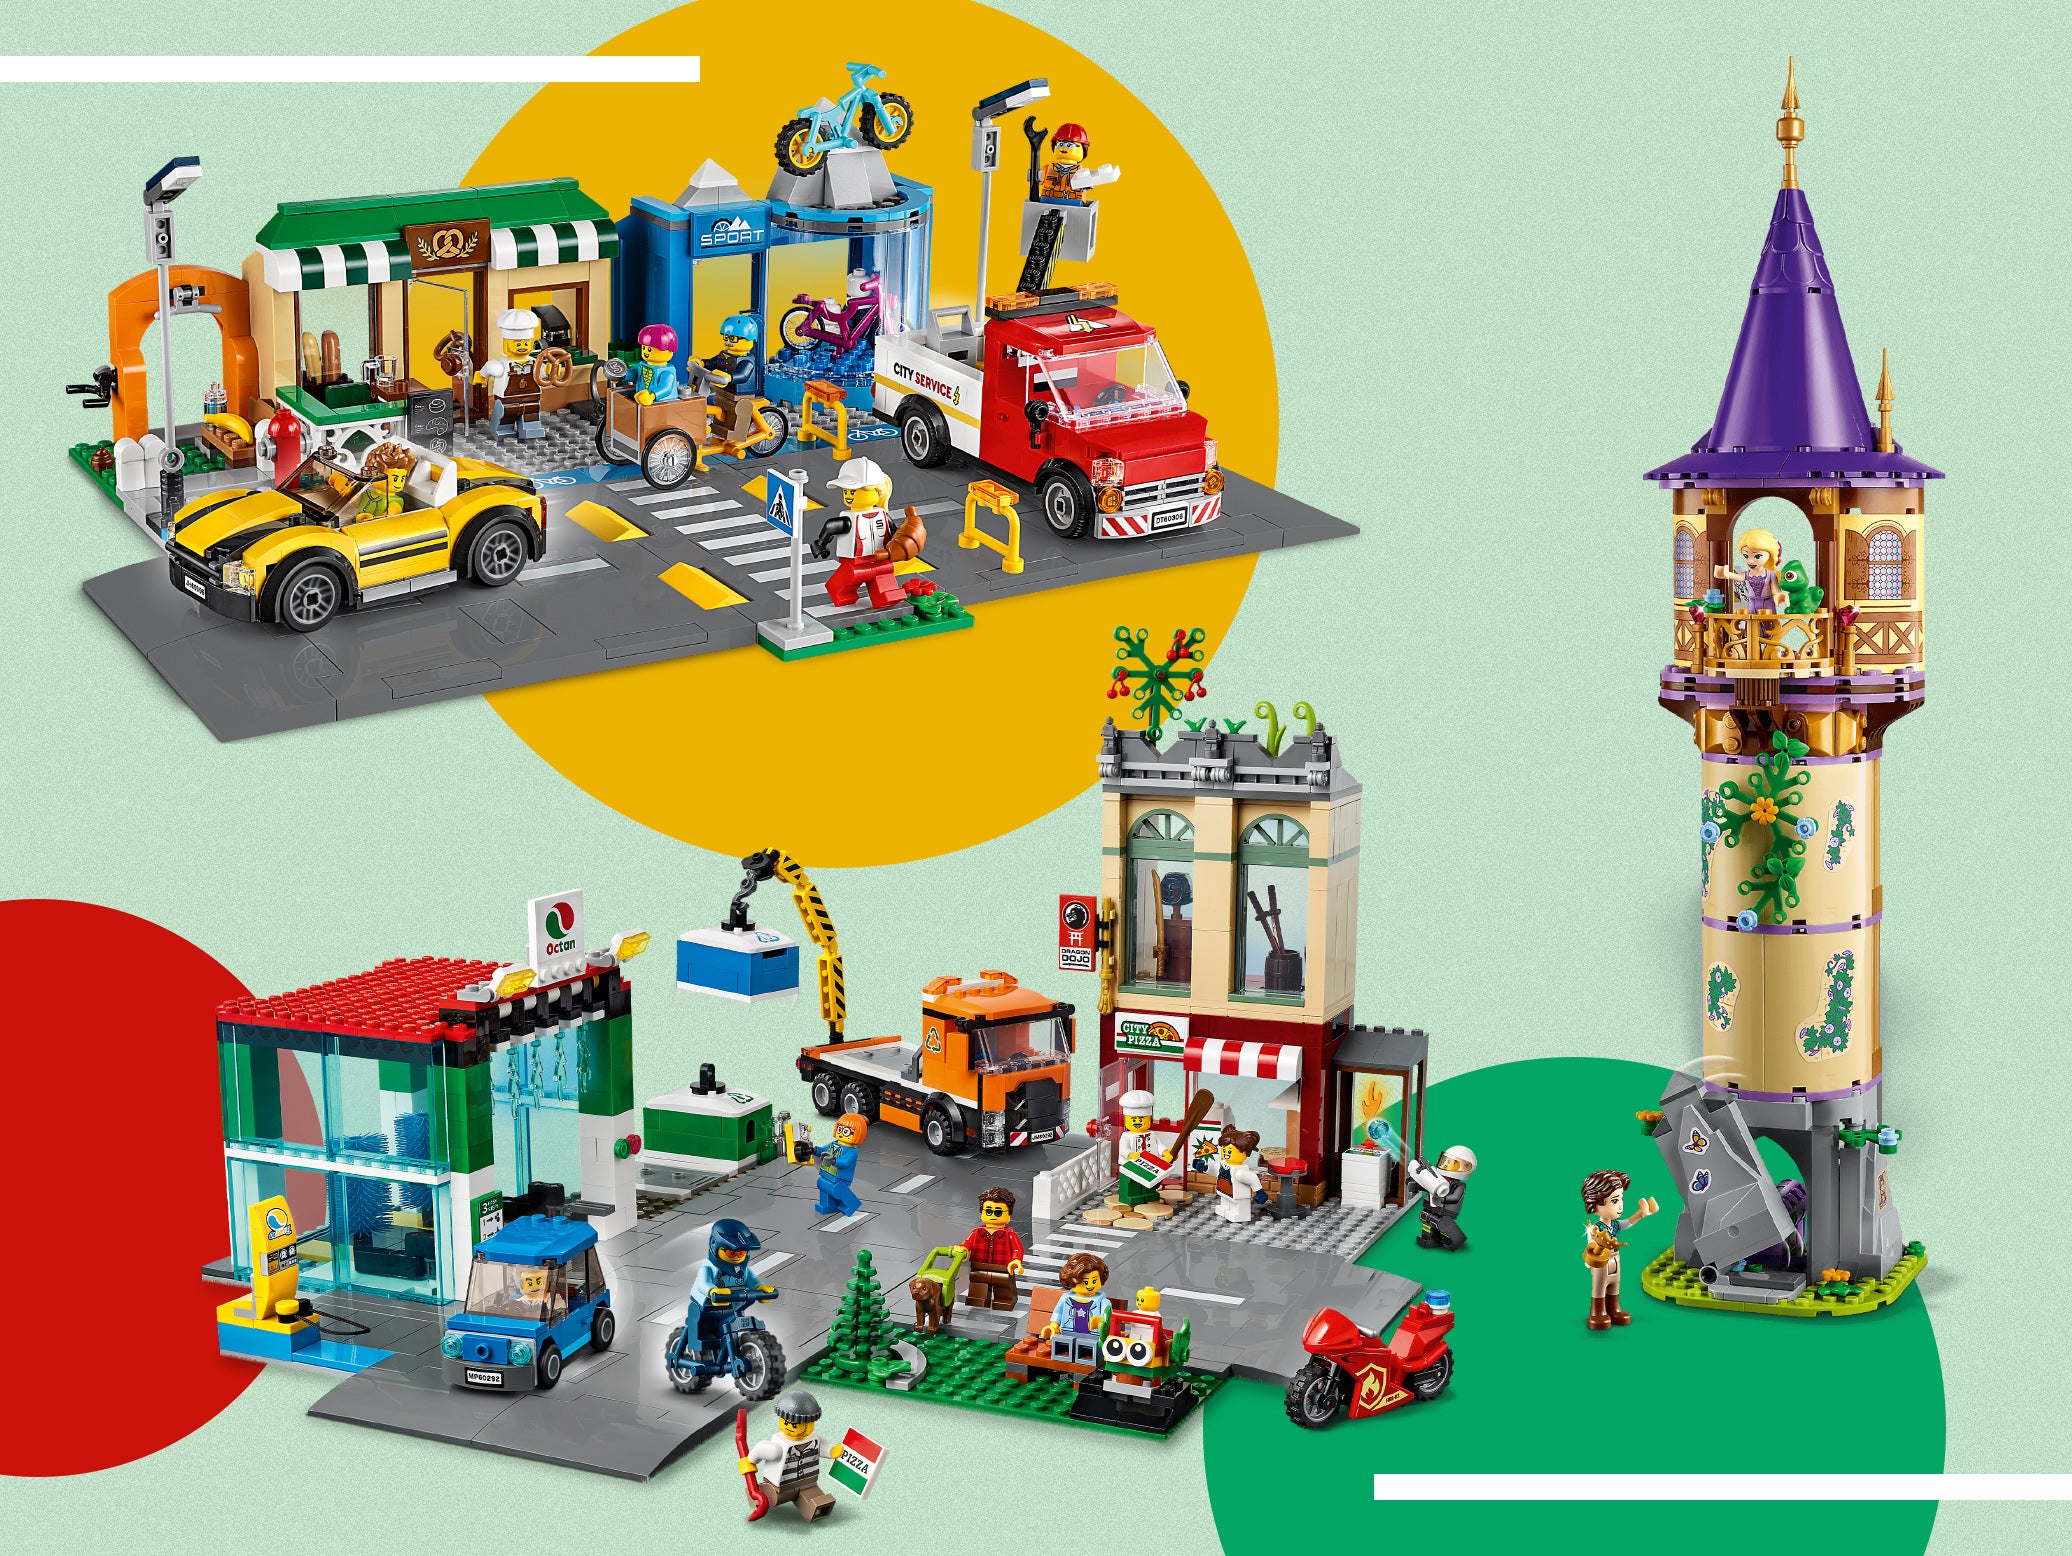 Black Friday Lego deals 2021: What to 